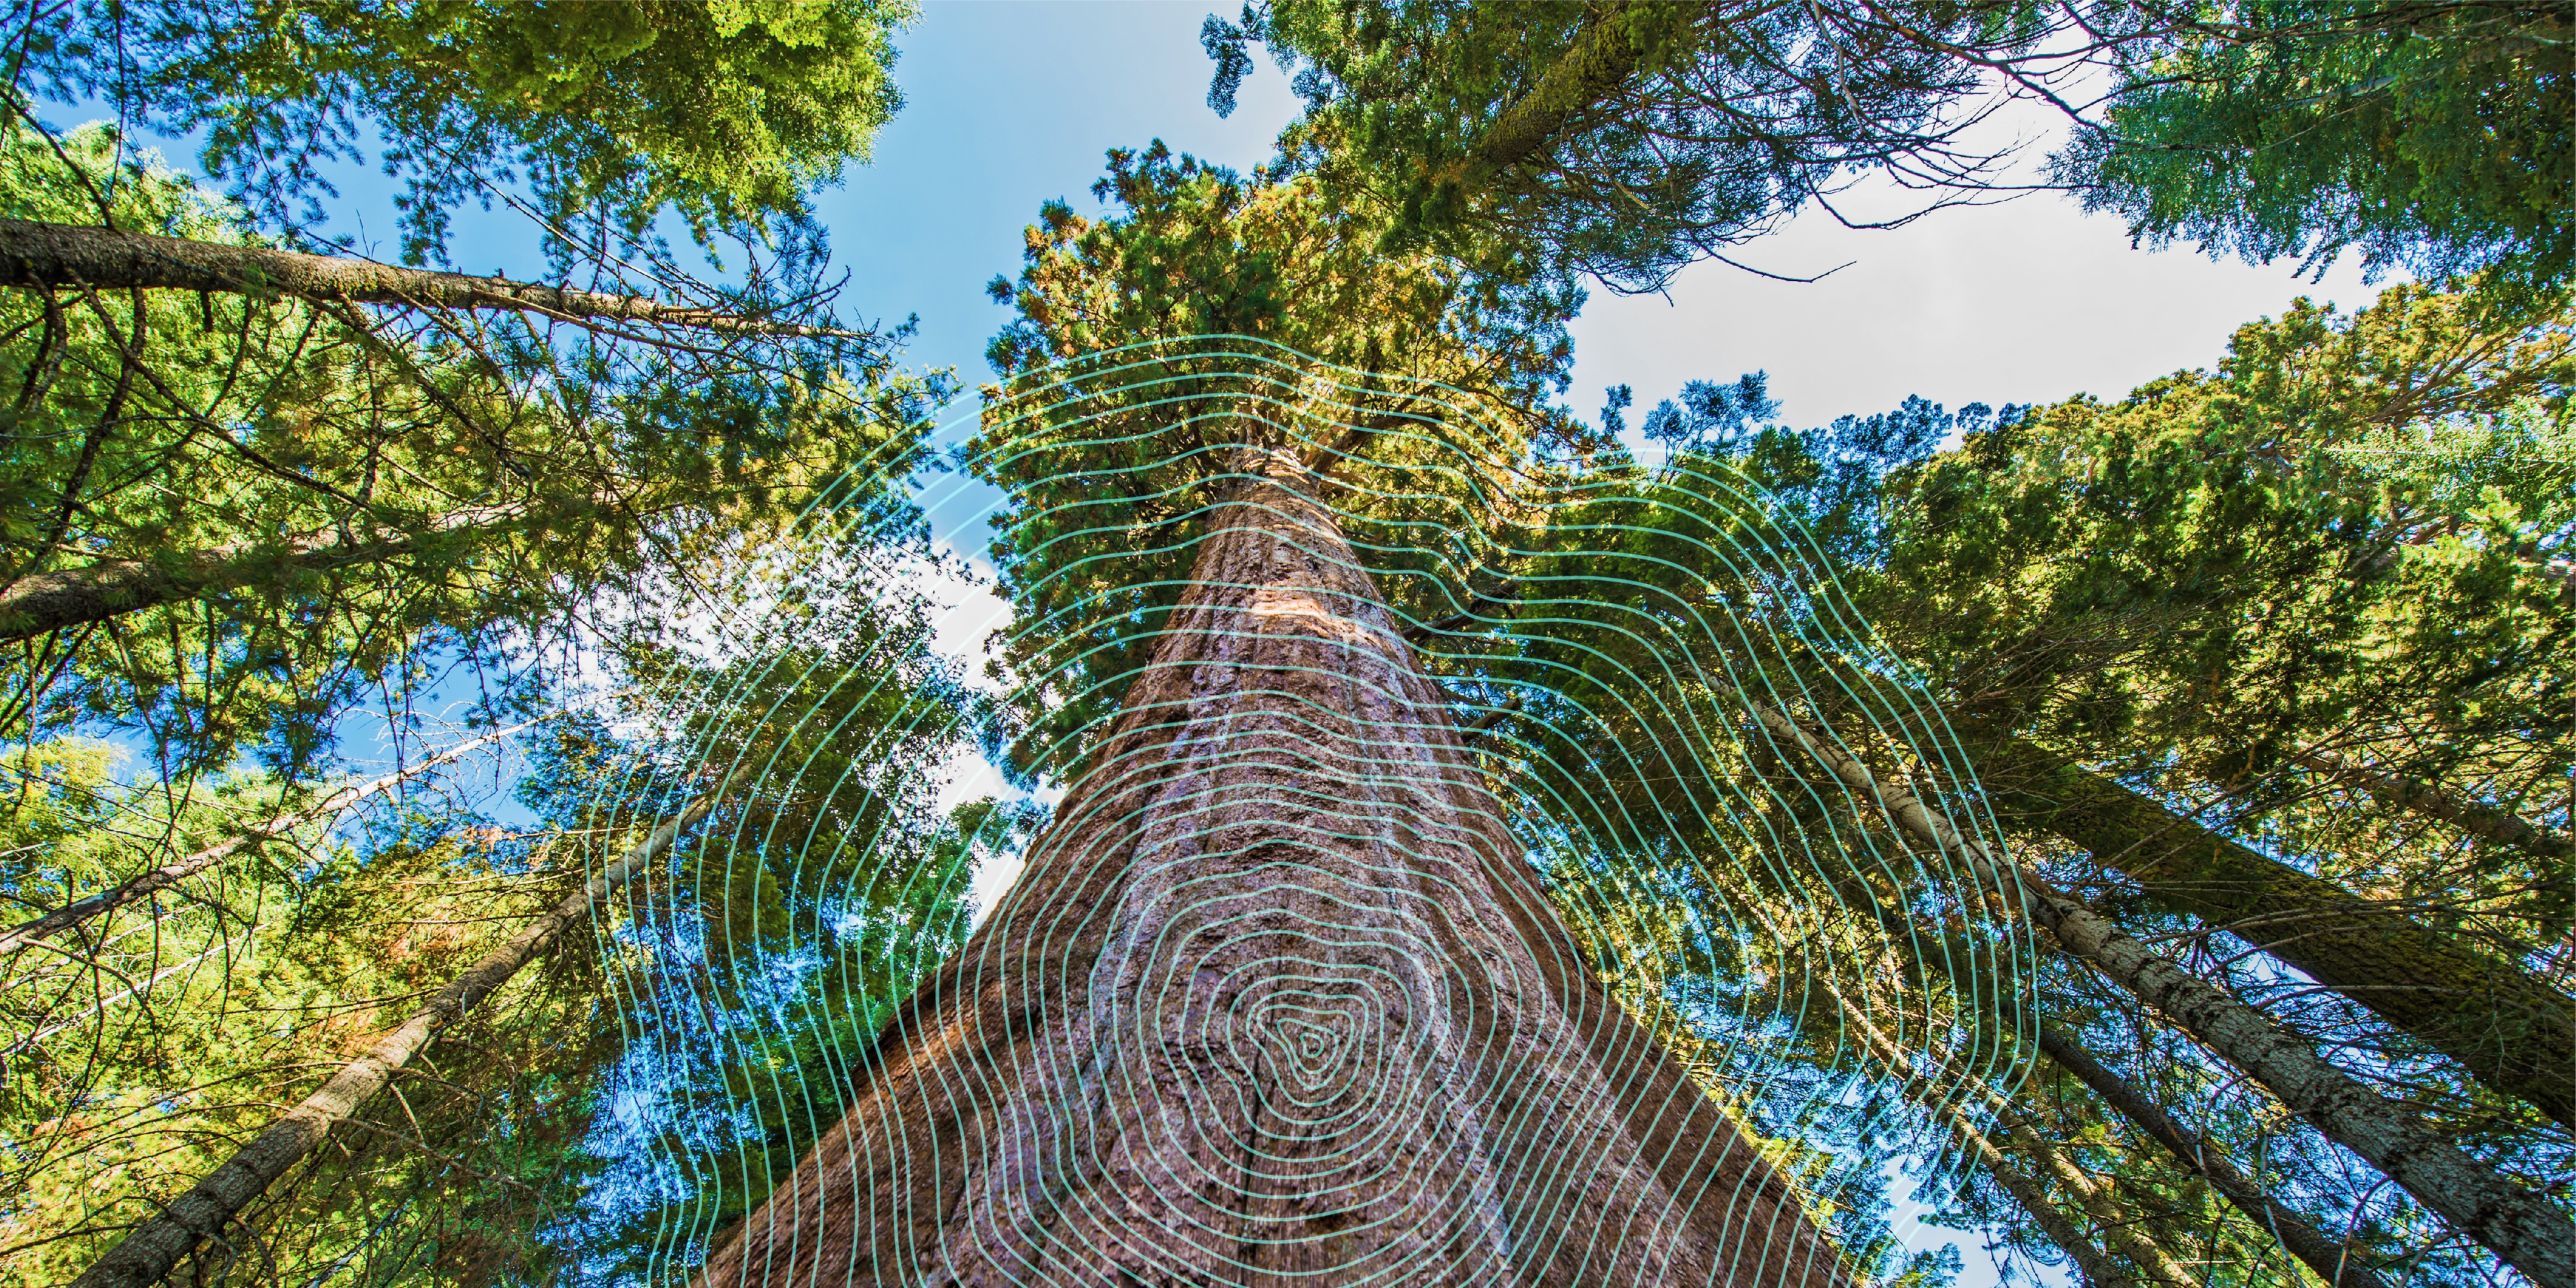 redwoods photo with rings overlaid